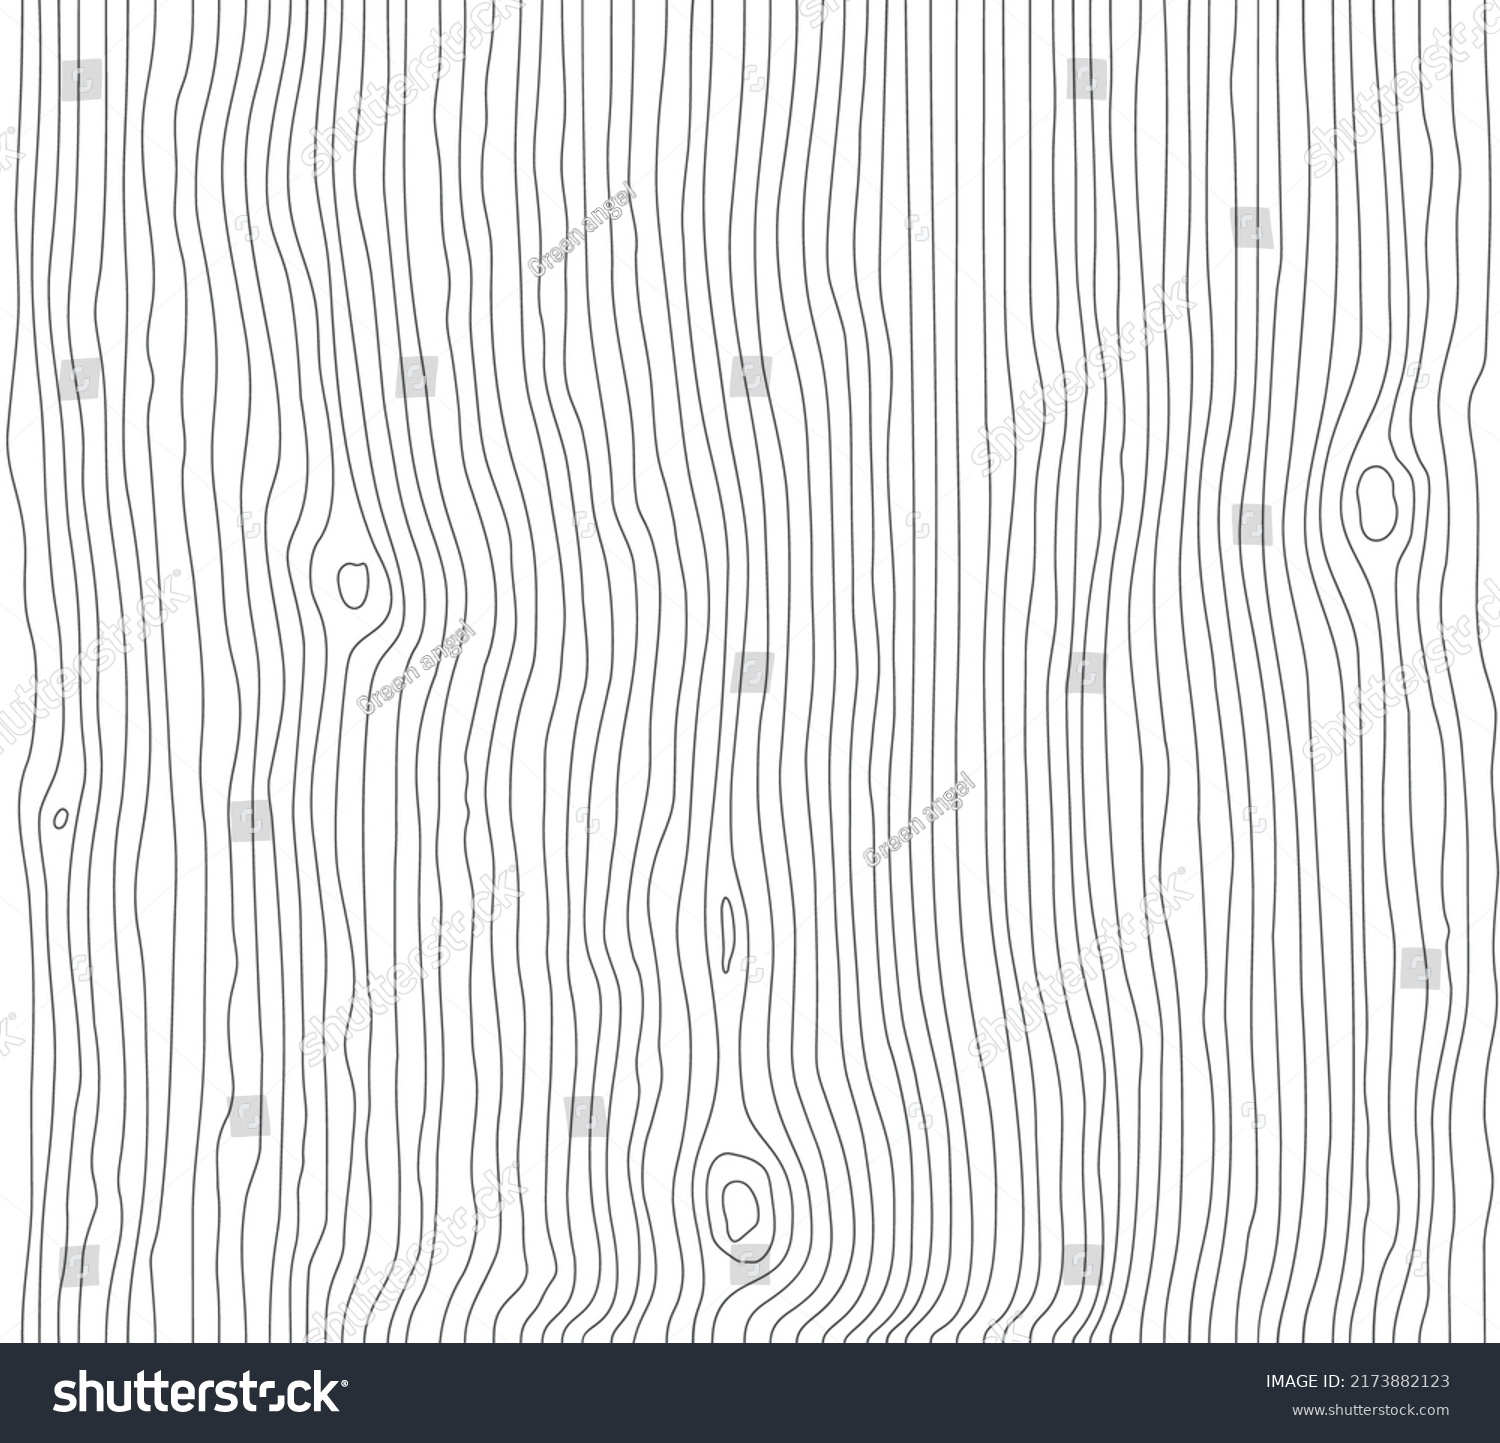 Wood Grain White Texture Seamless Wooden Stock Vector (Royalty Free ...